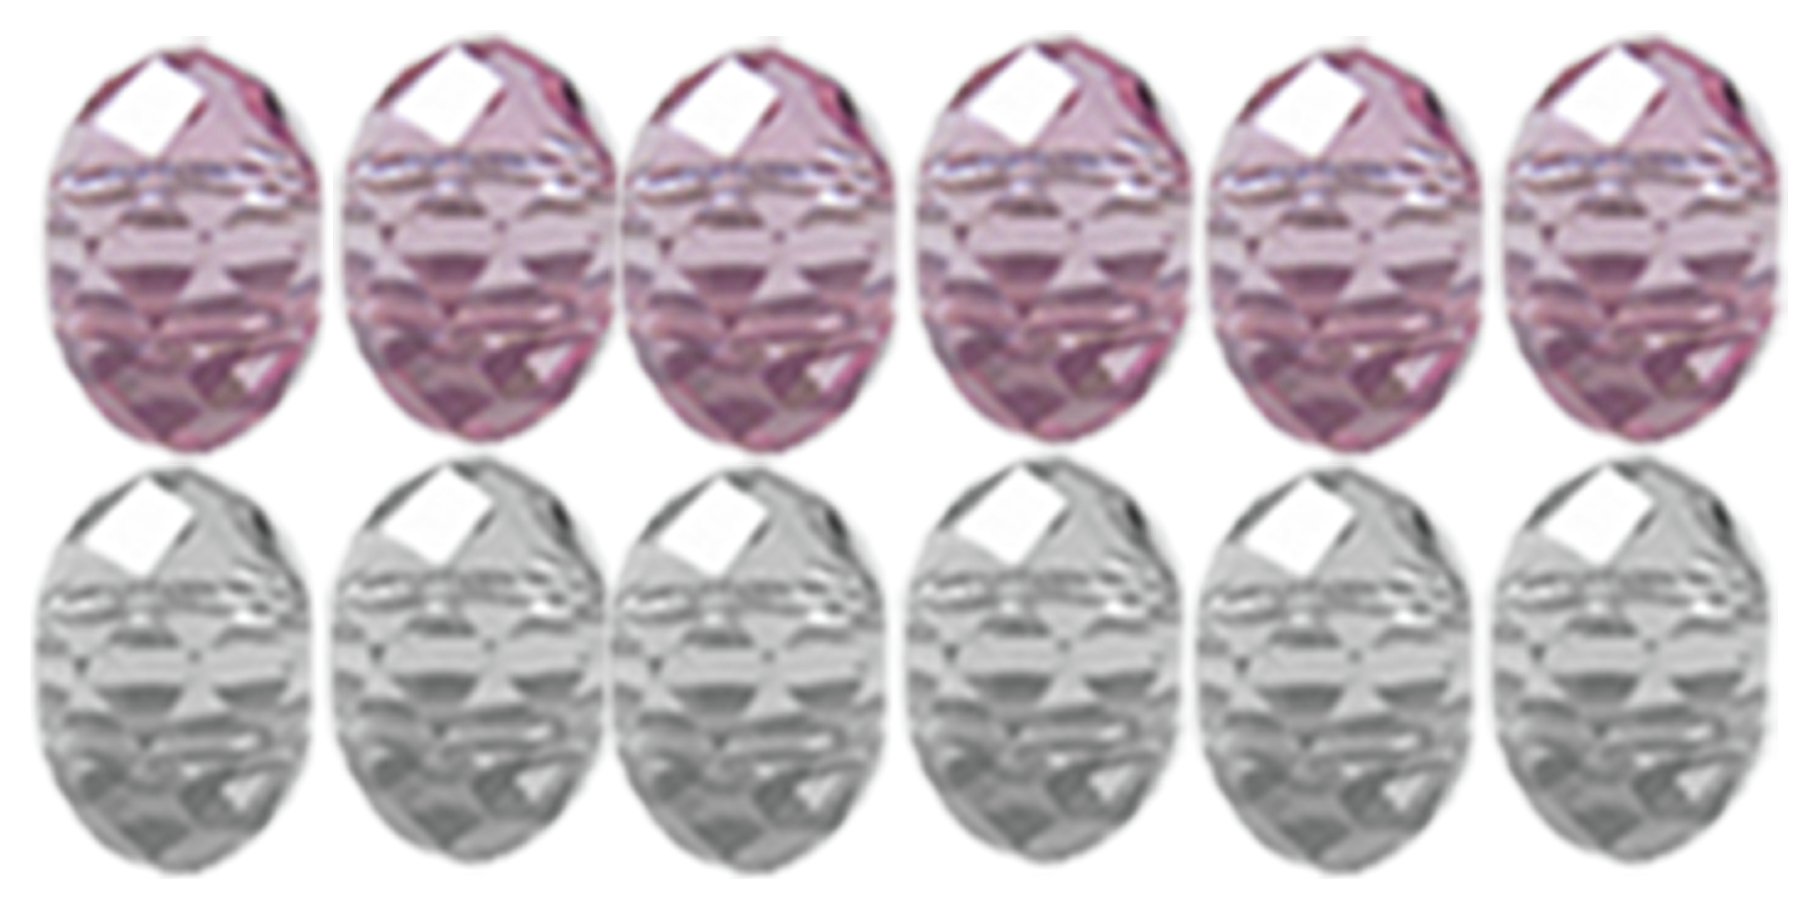 Miss Glitter Kids Faceted Pink Beads Assortment - Set of 12. Review